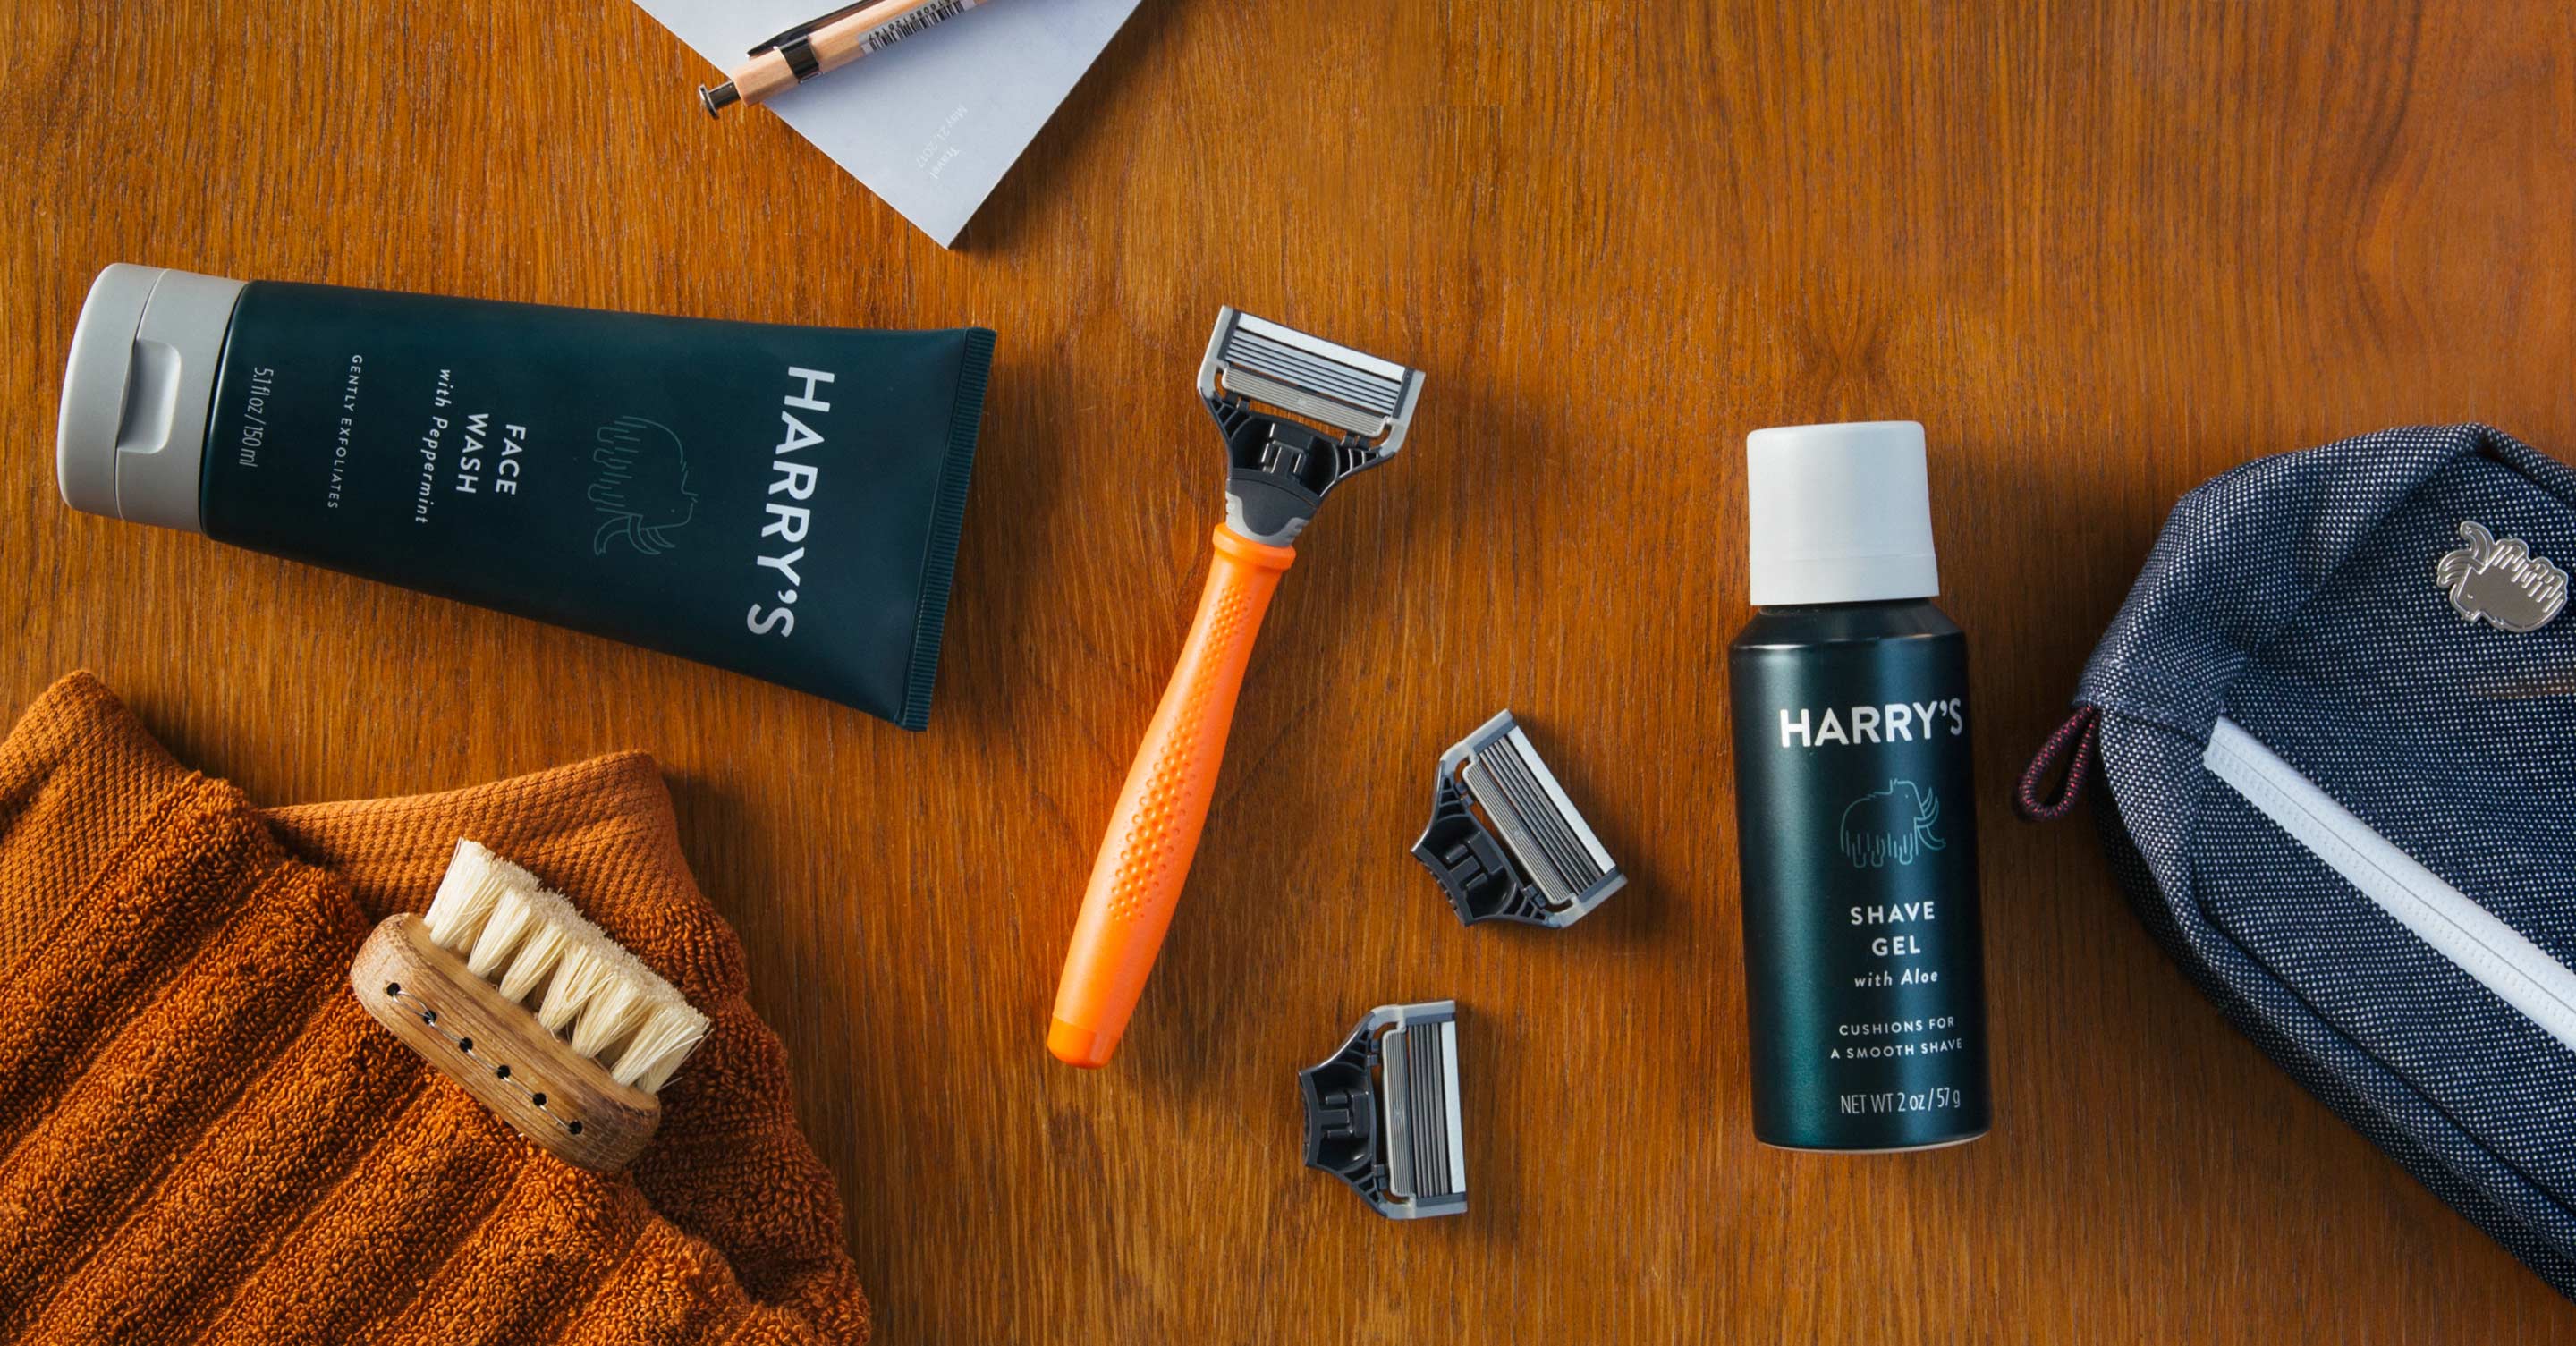 Exceptional Quality Harry’s Razor Blades for a Smooth, Close Shave